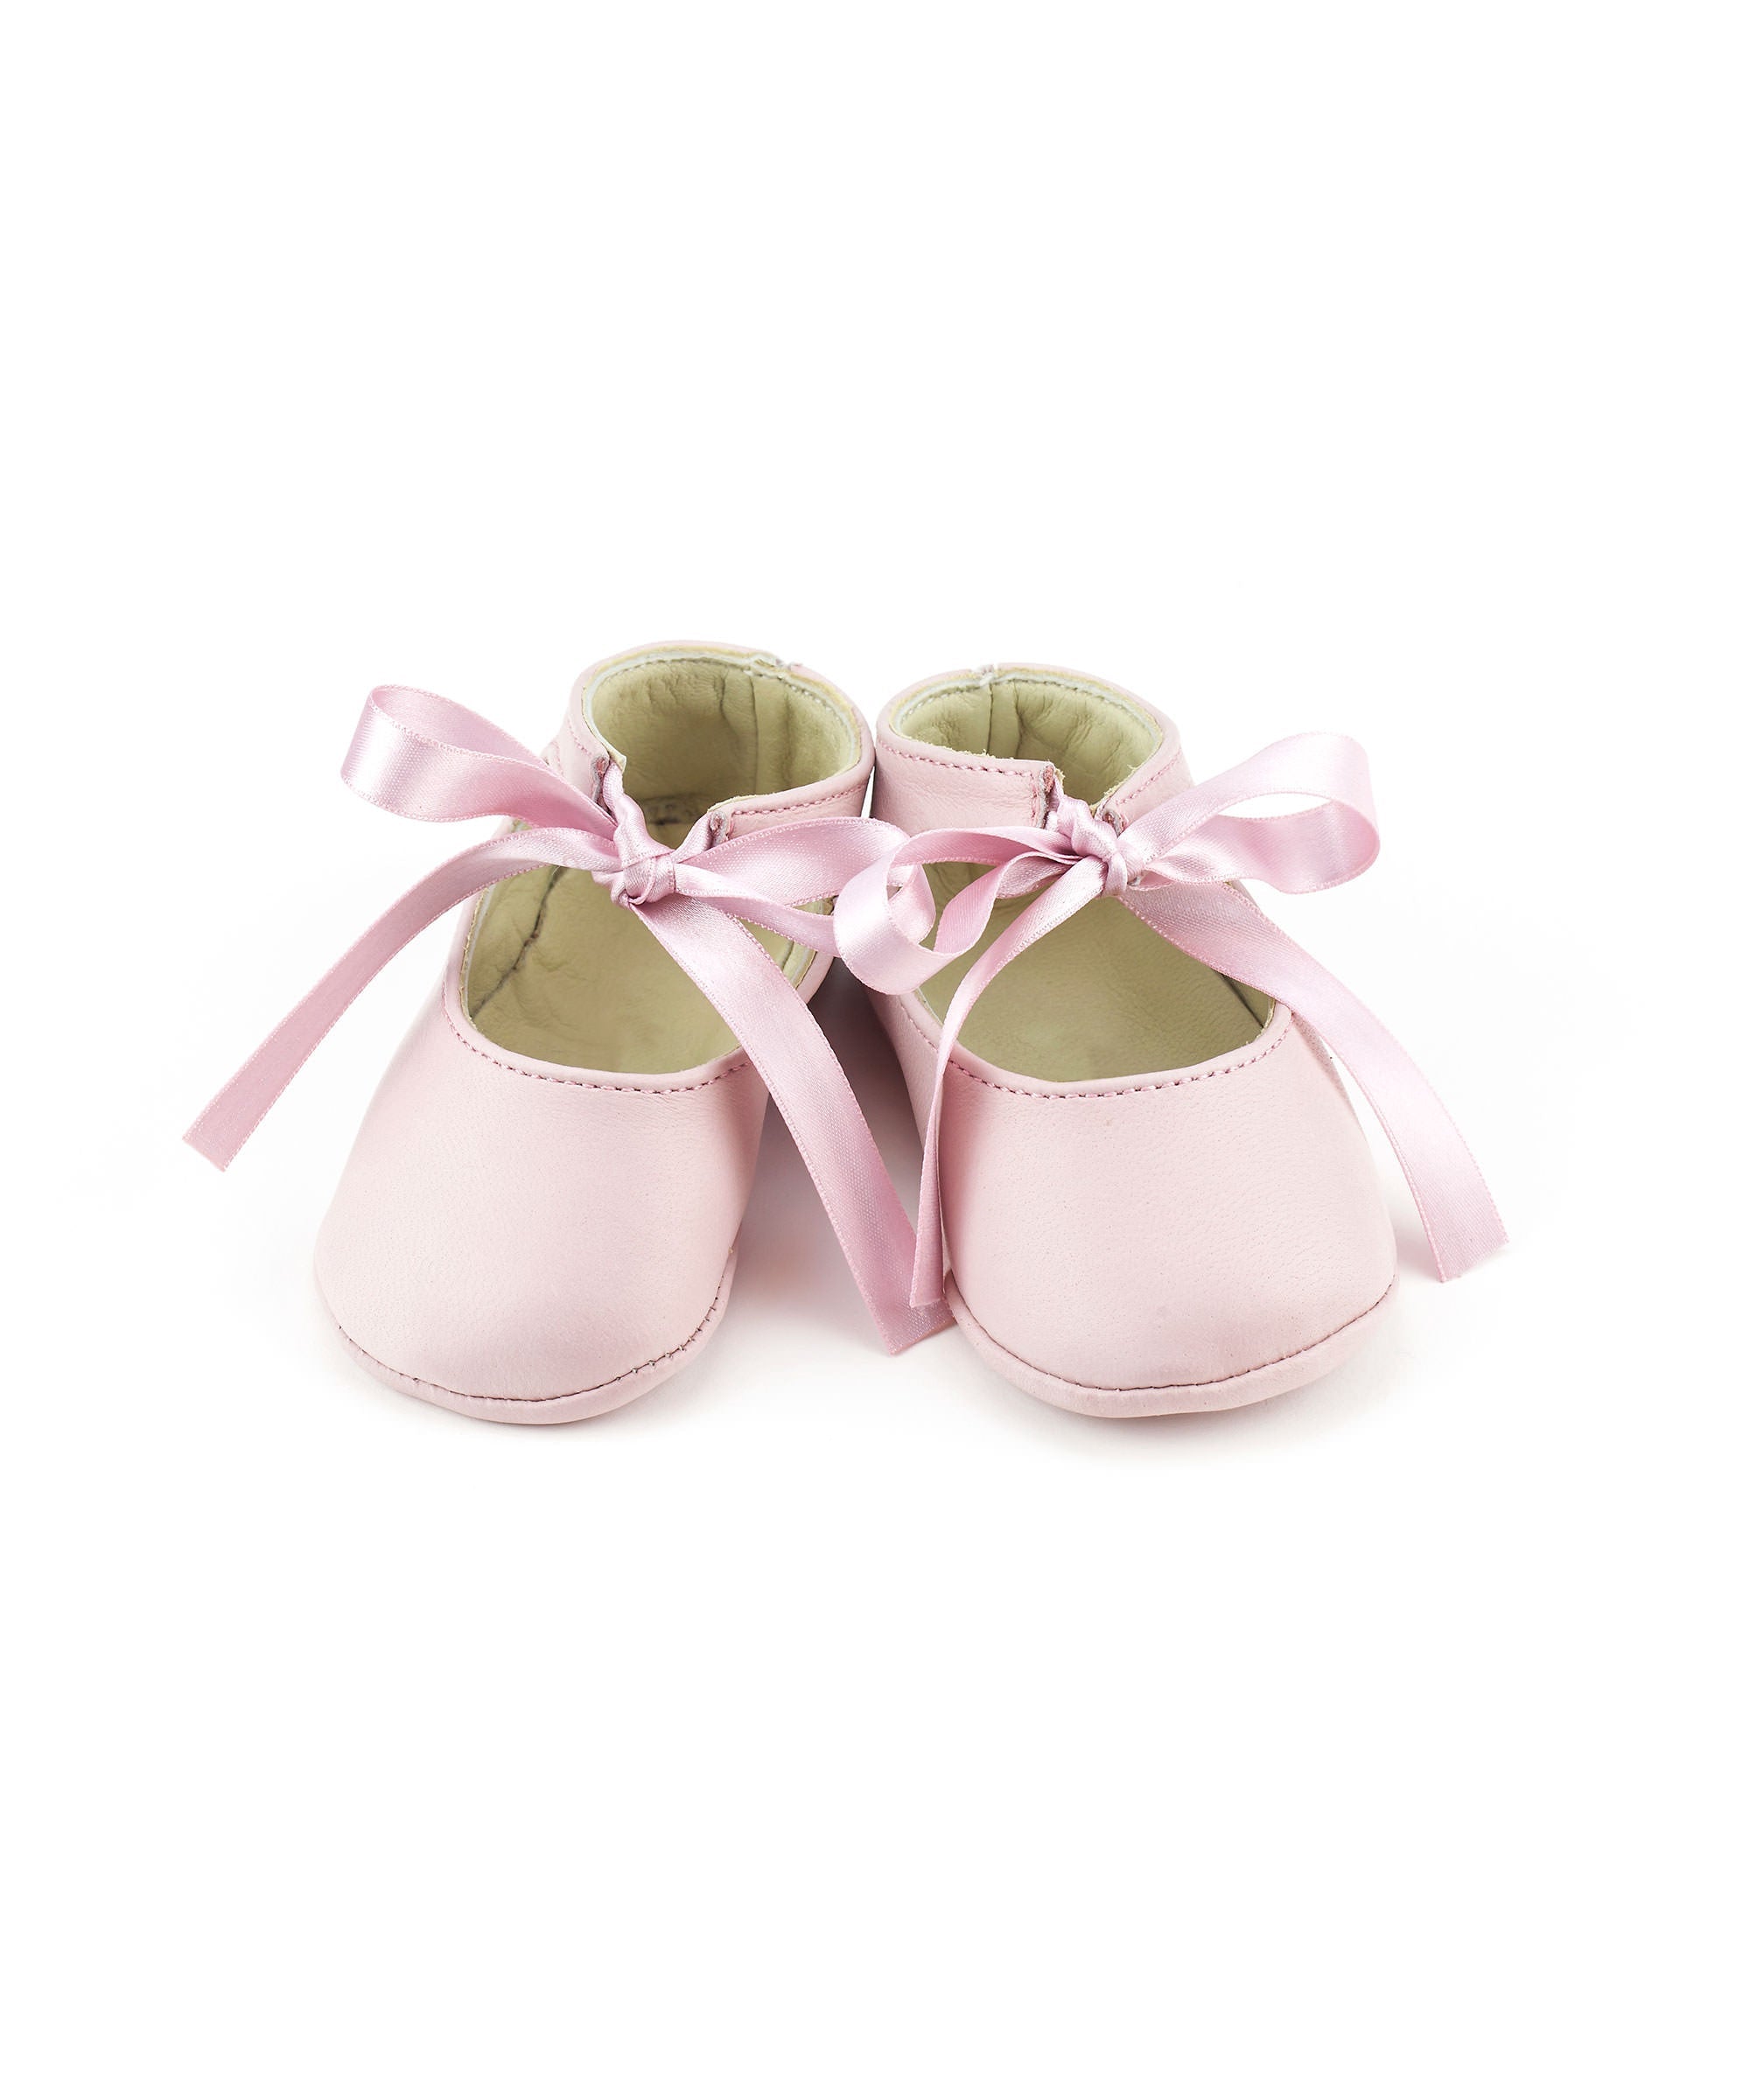 Little Royals Leather Booties Josephine - Pink